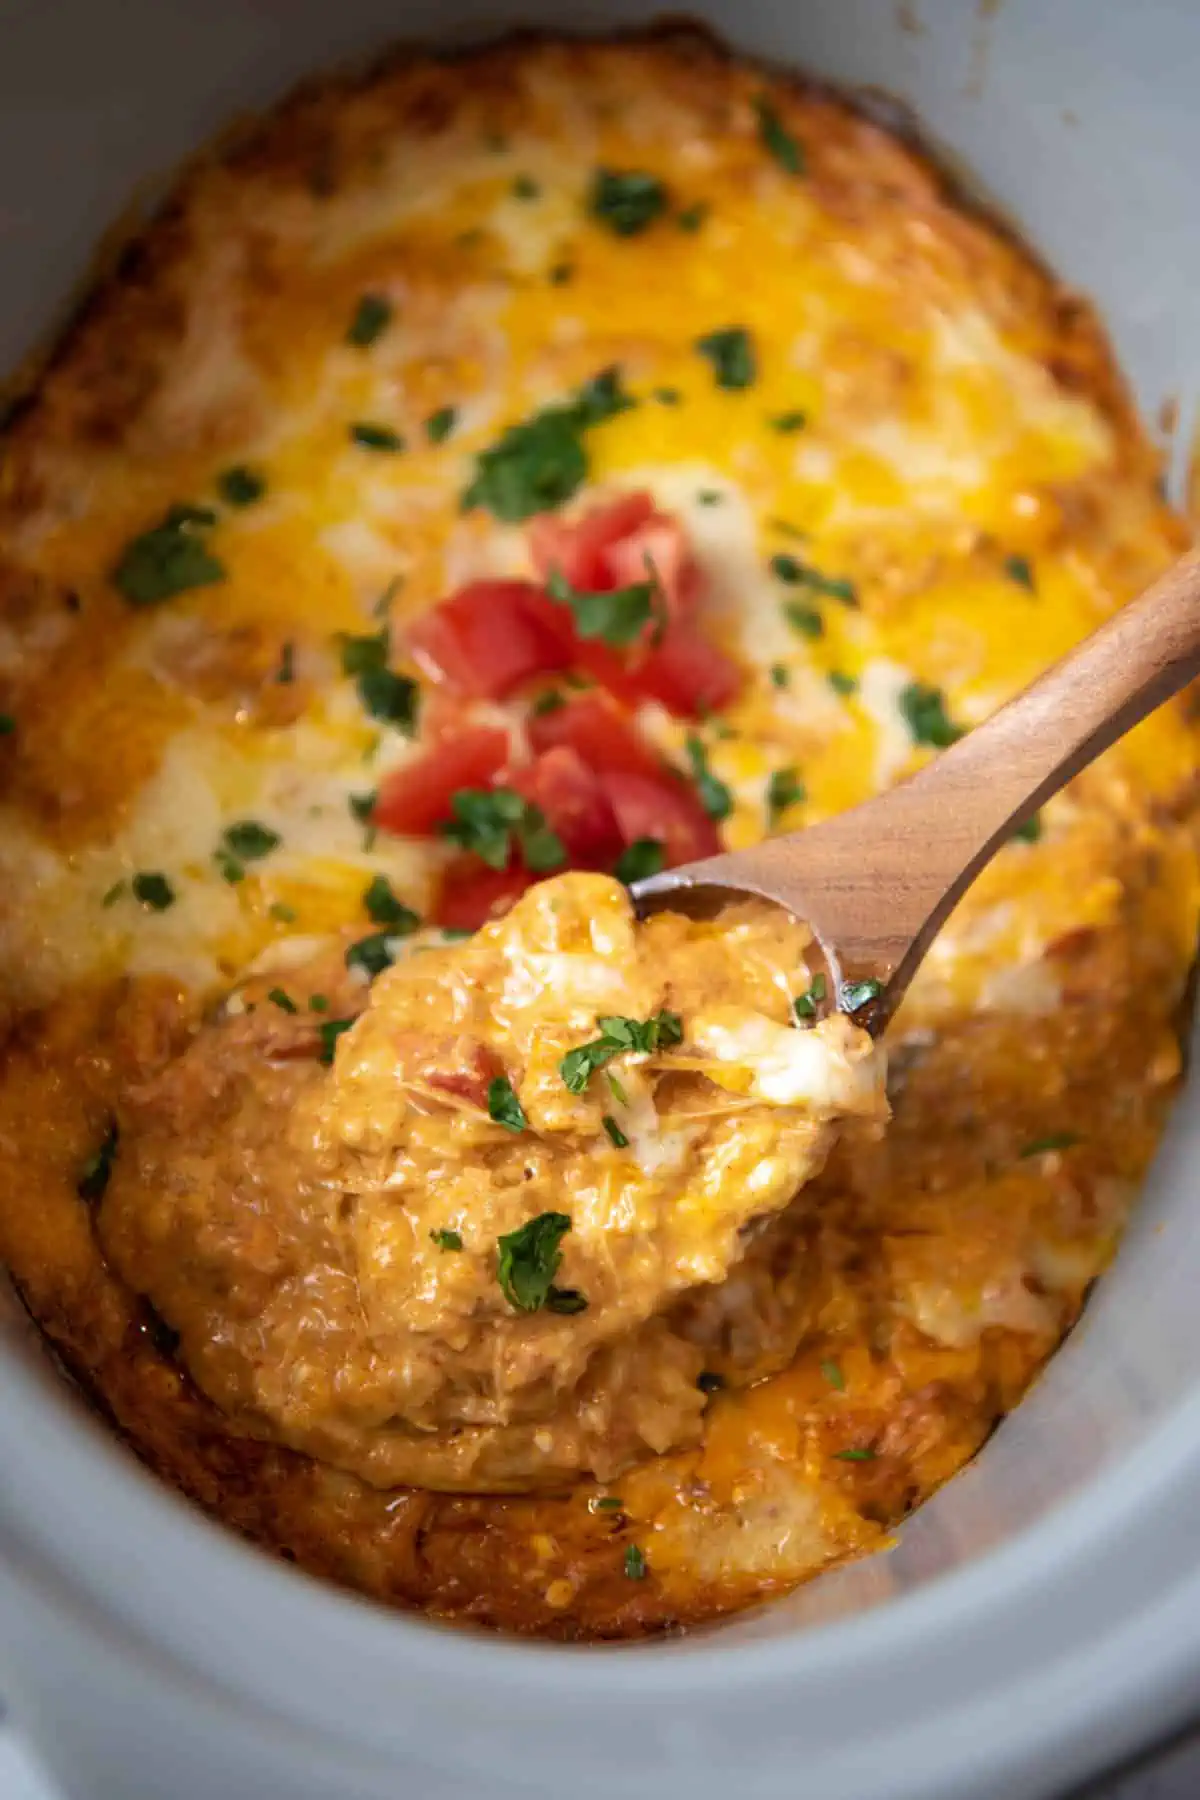 wooden spoonful of CrockPot chicken enchilada casserole over gray slow cooker full of cheesy casserole